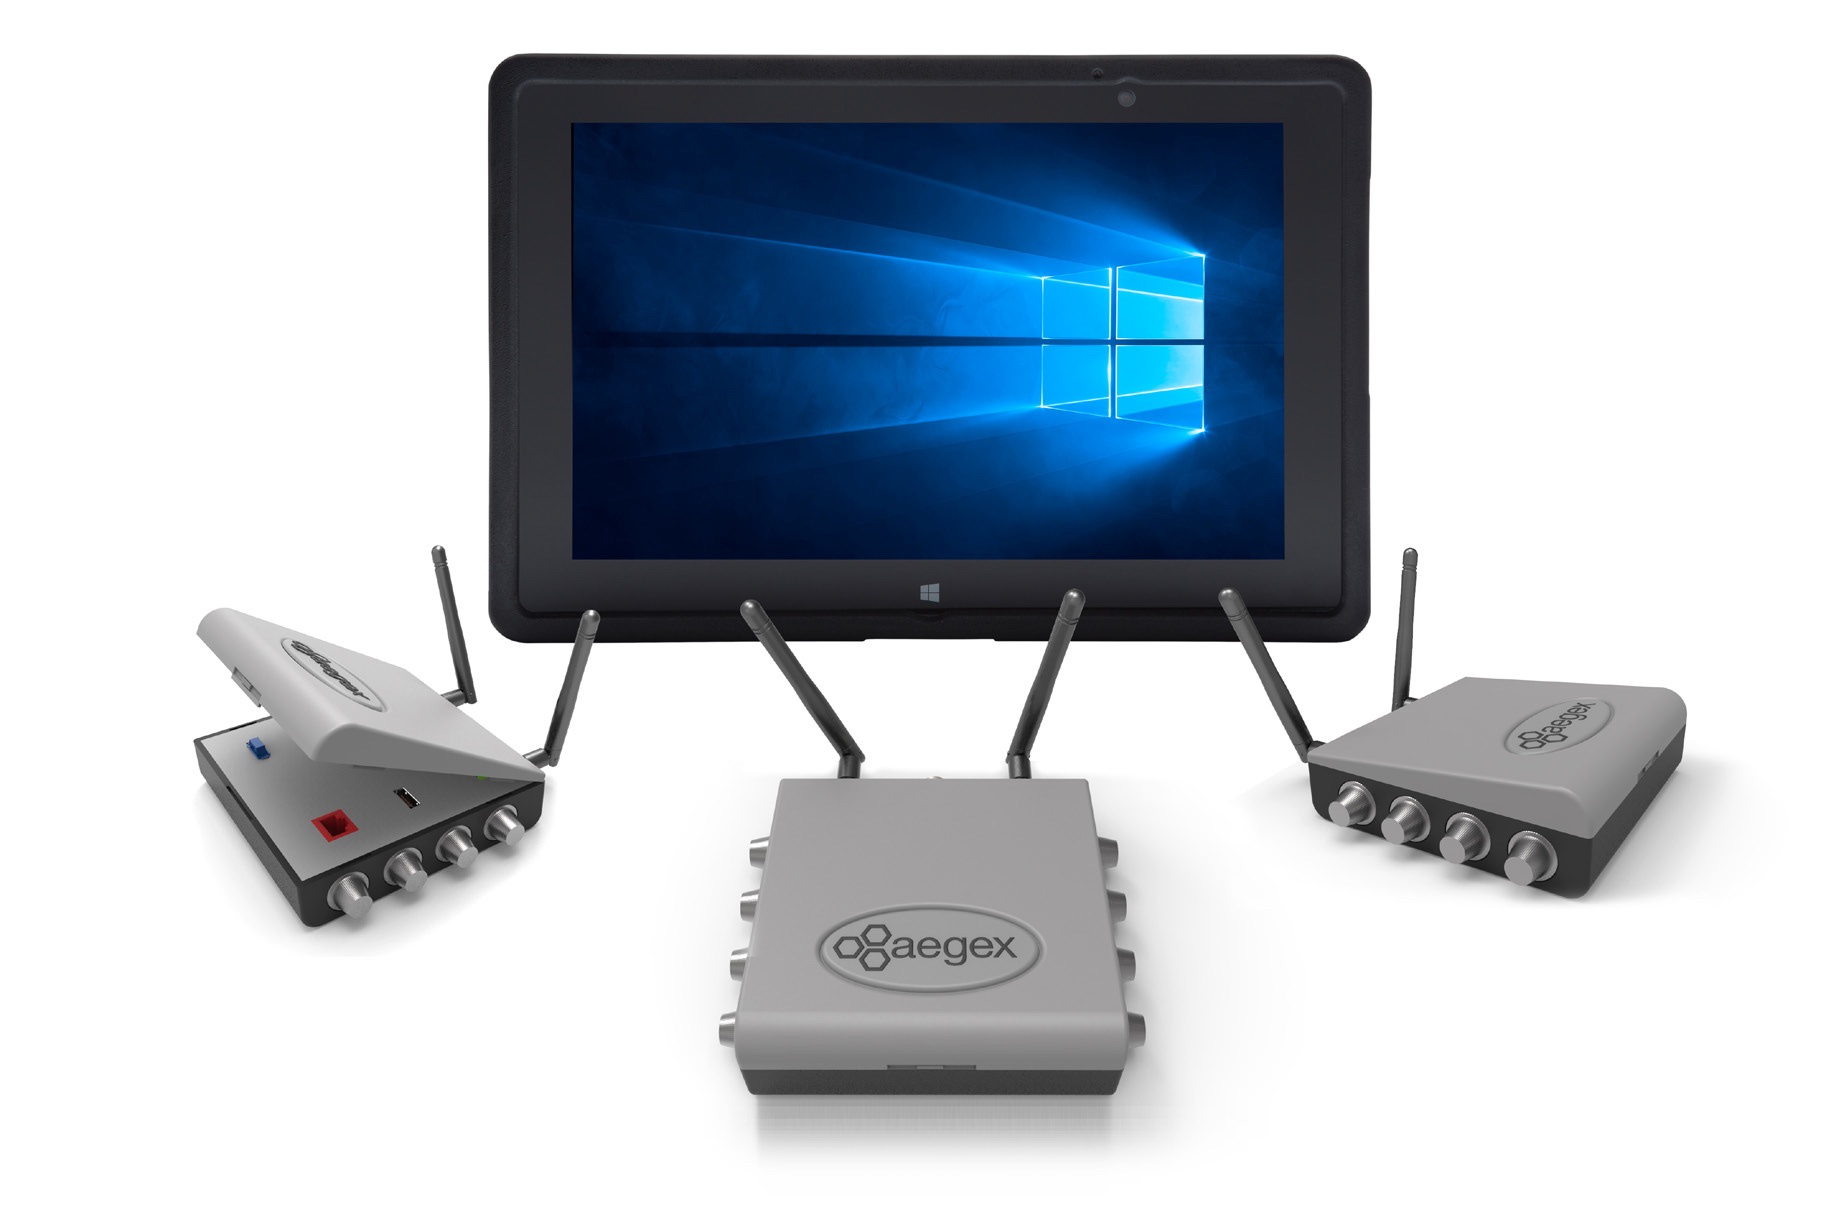 Aegex Tablets Featured at New Microsoft Technology Center in Houston